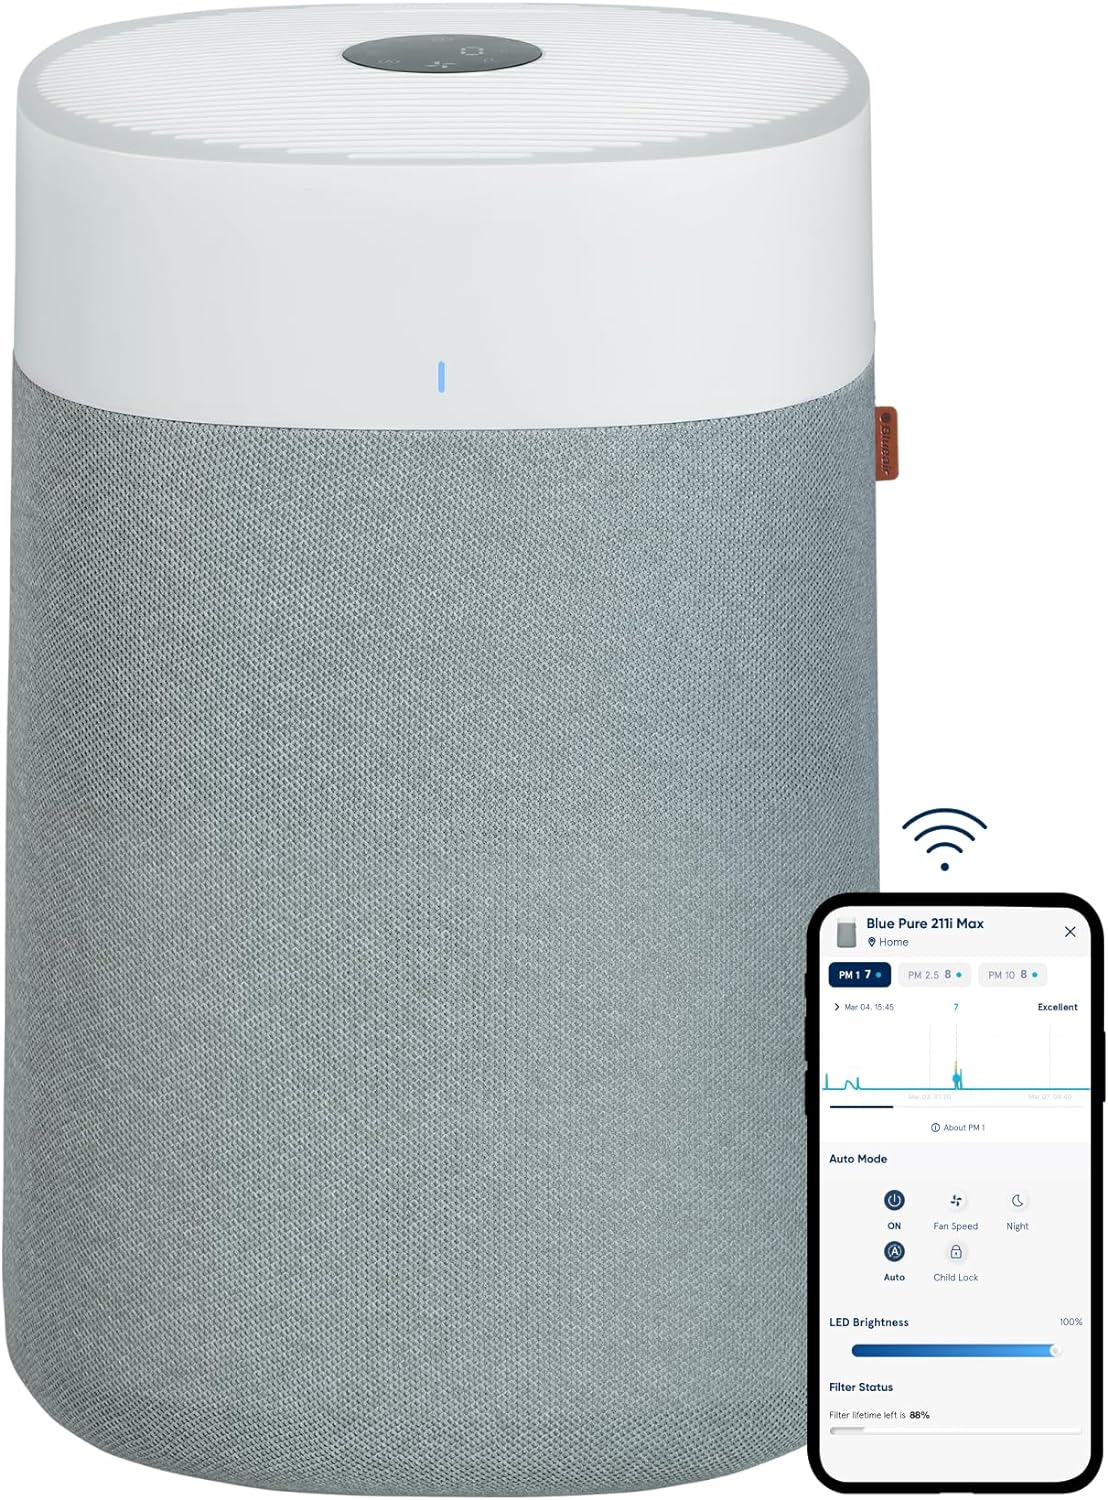 One of the hottest items to hit the market in recent years is the BlueAir air purifier